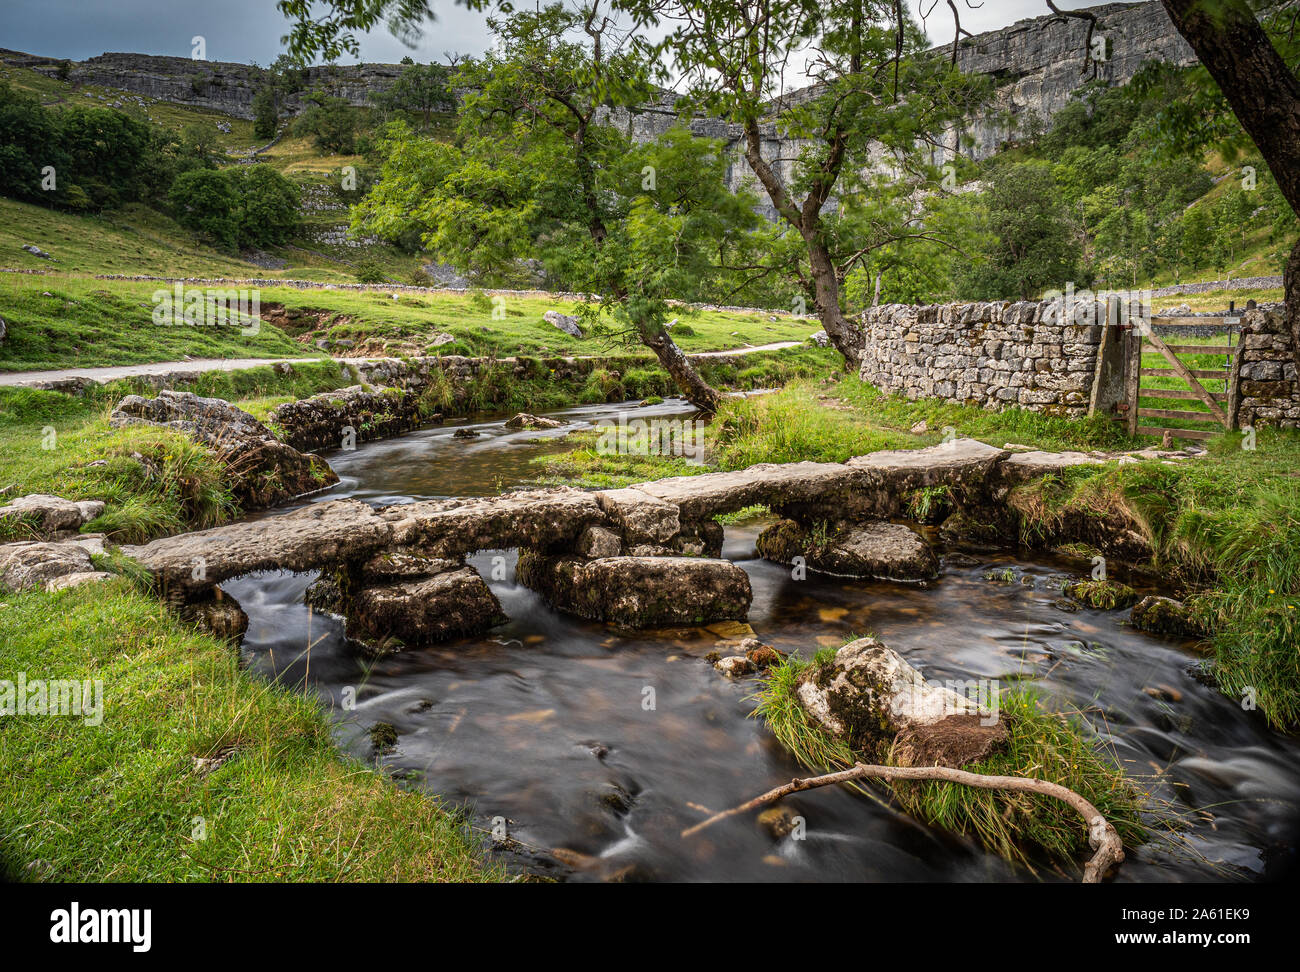 Old stone clapper bridge over Malham Beck with Malham Cove in the background Yorkshire Dales, England, UK. Stock Photo